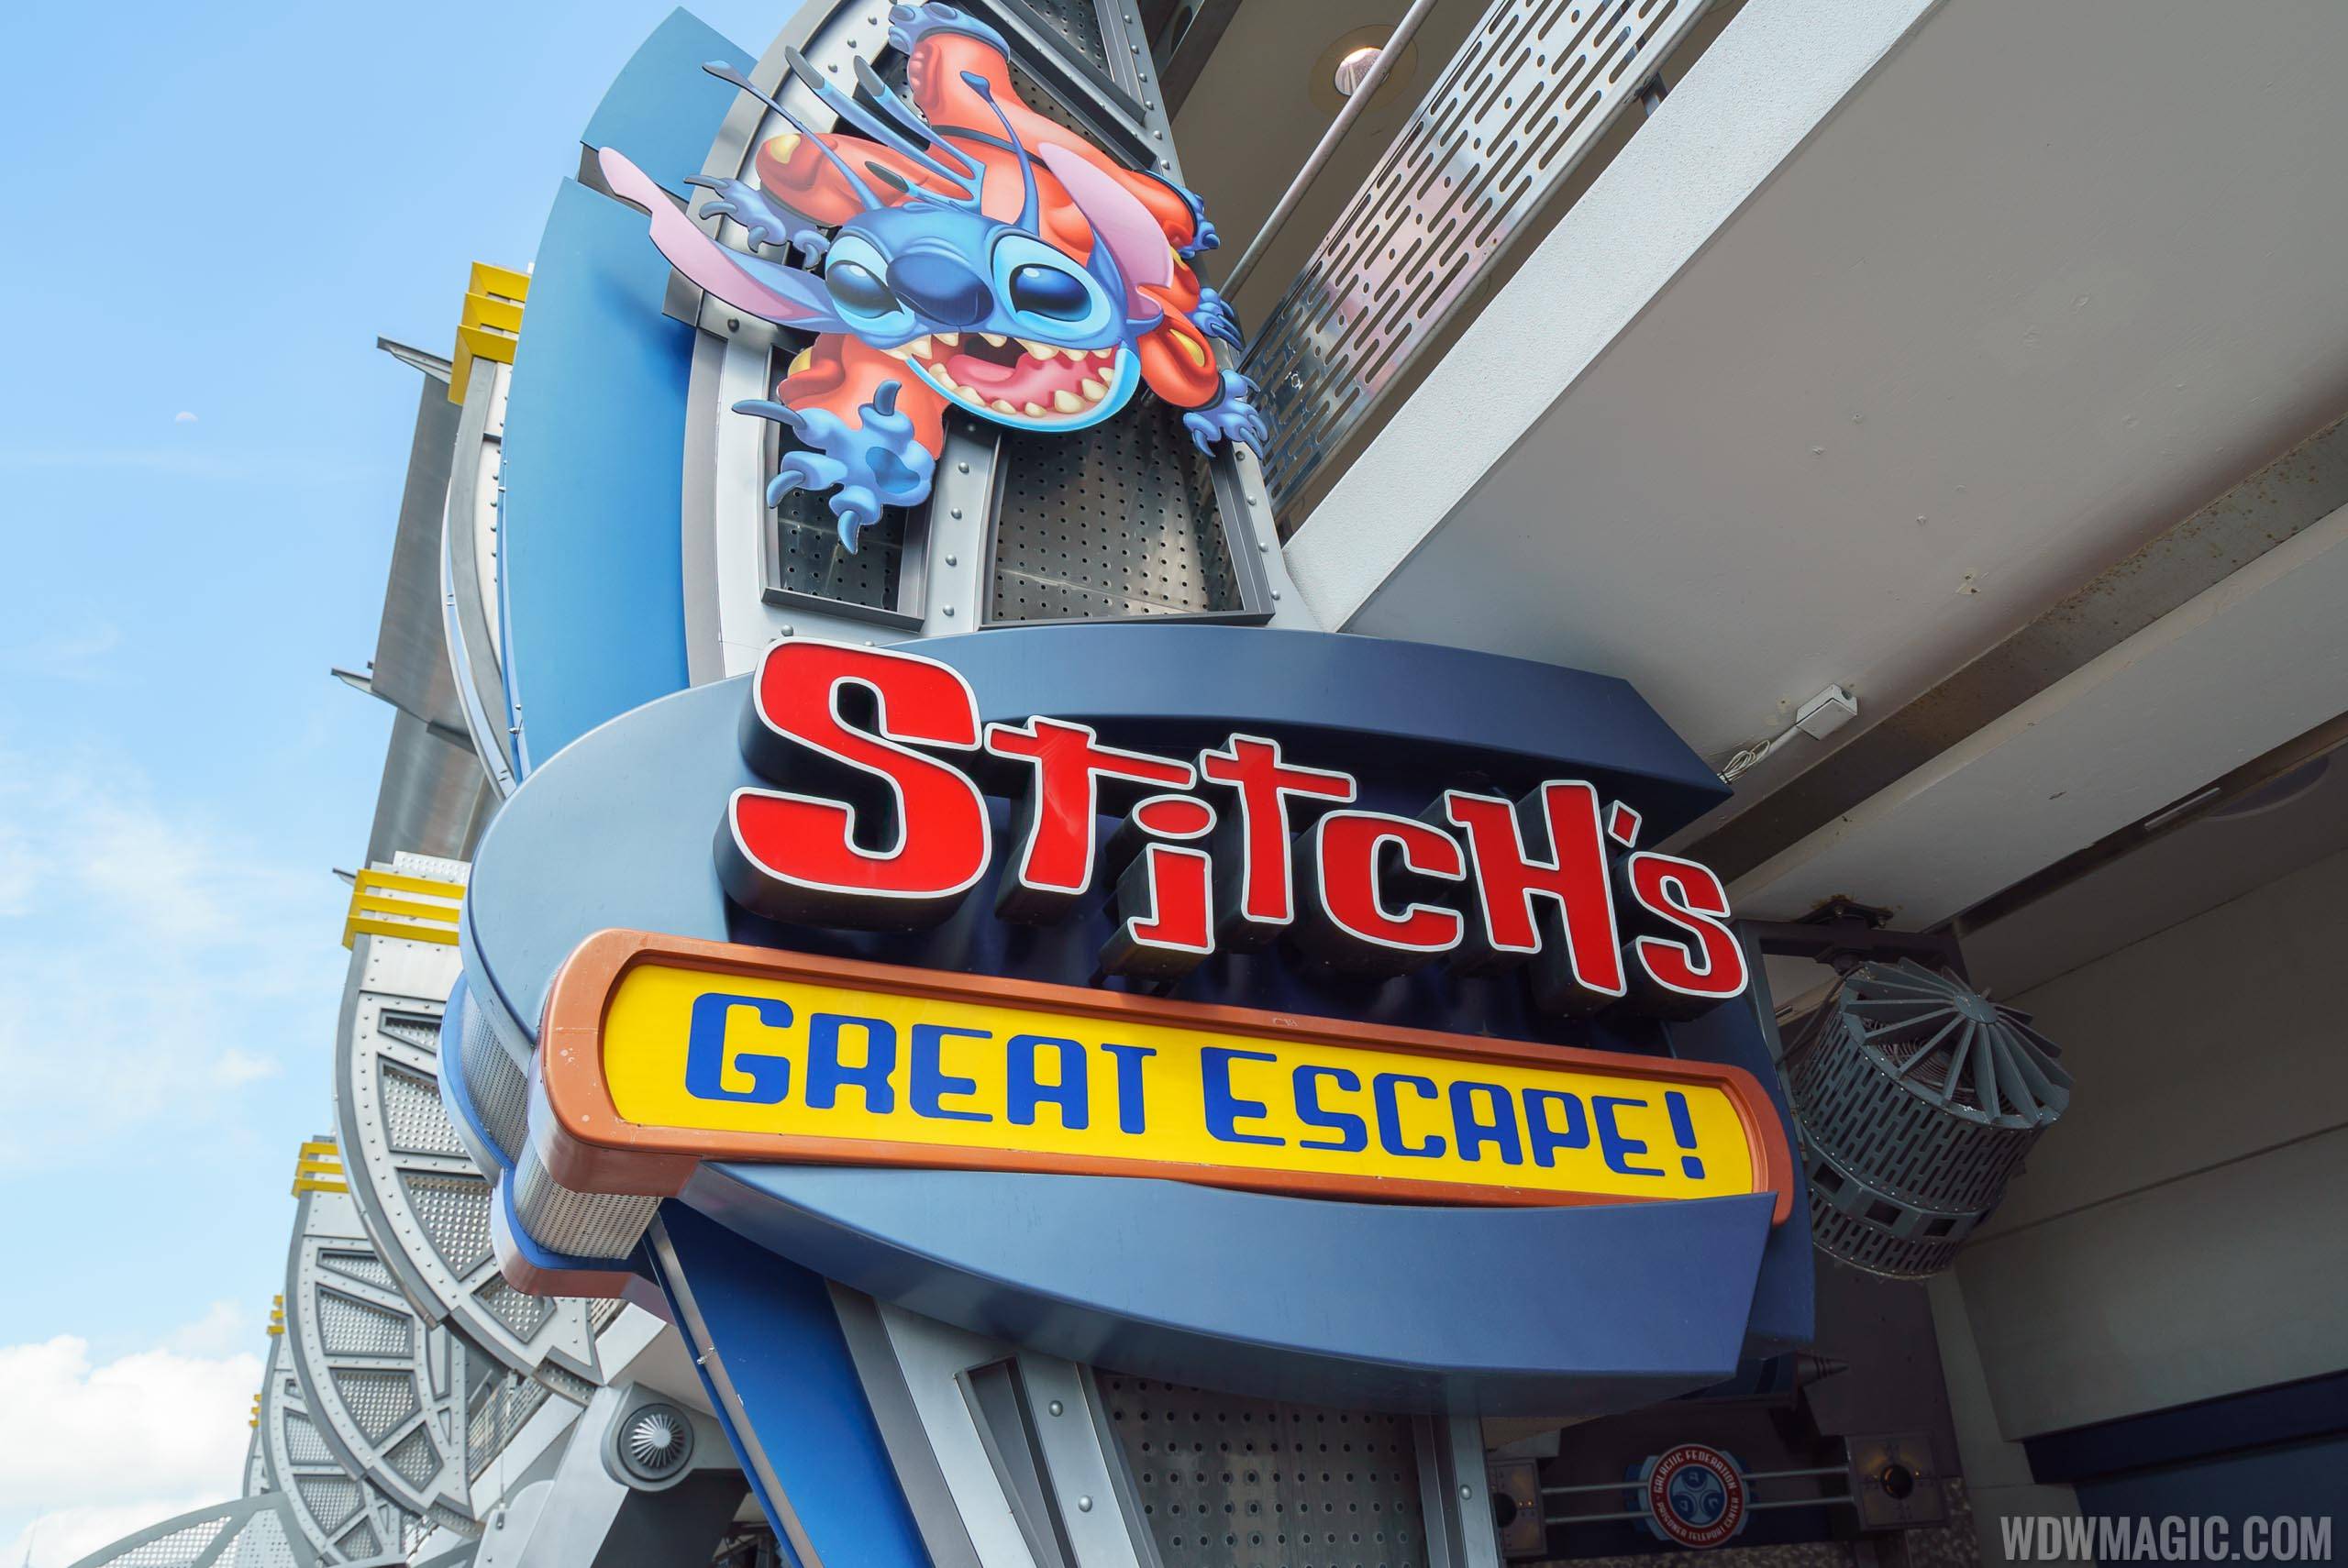 Stitch's Great Escape! returns this weekend